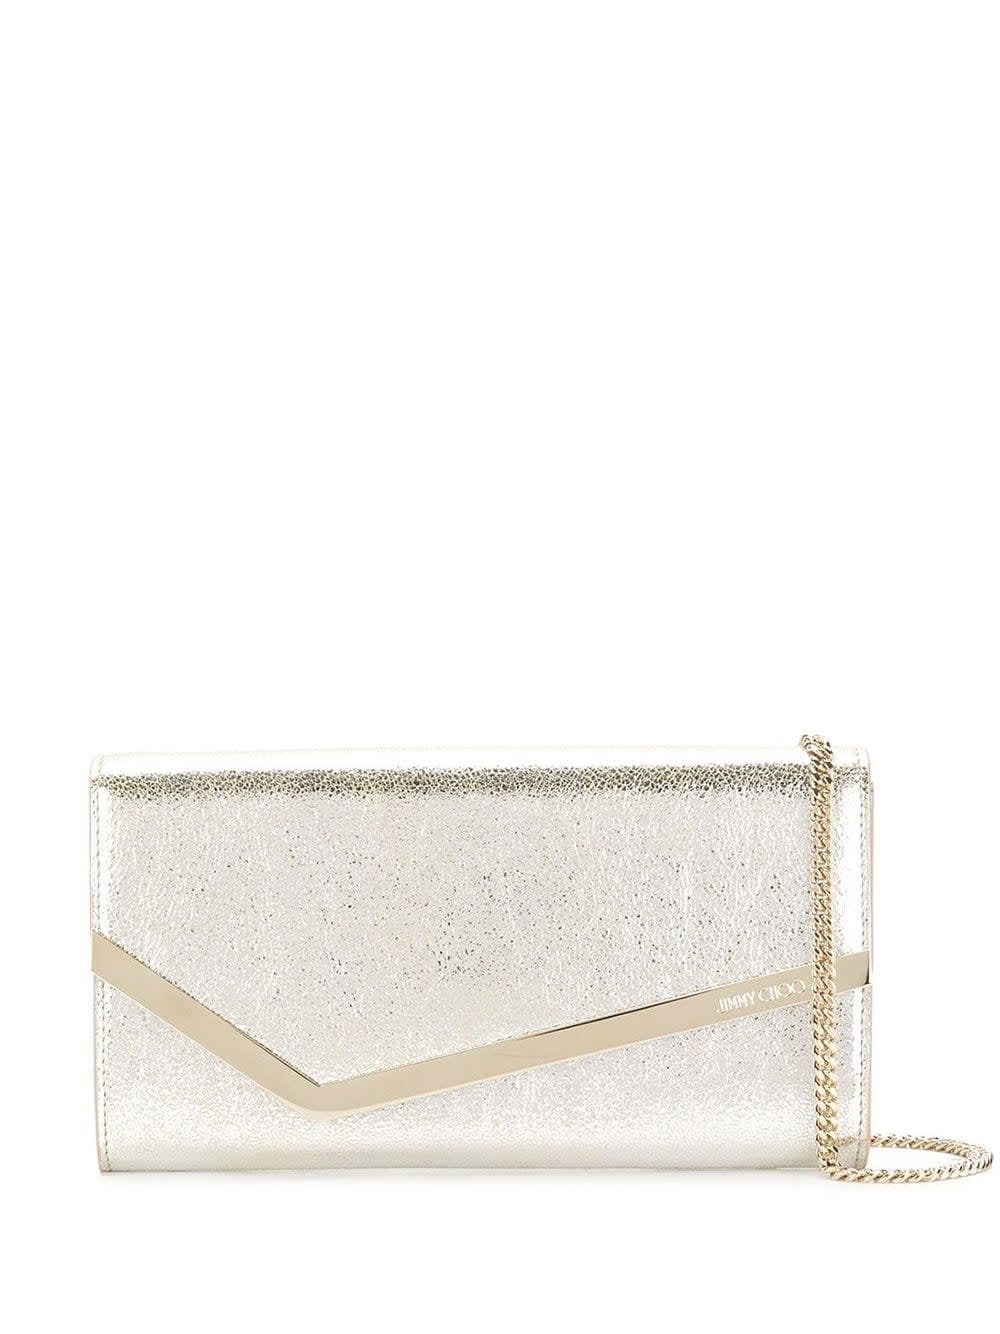 JIMMY CHOO EMMIE CLUTCH BAG IN CHAMPAGNE LEATHER WITH GLITTER